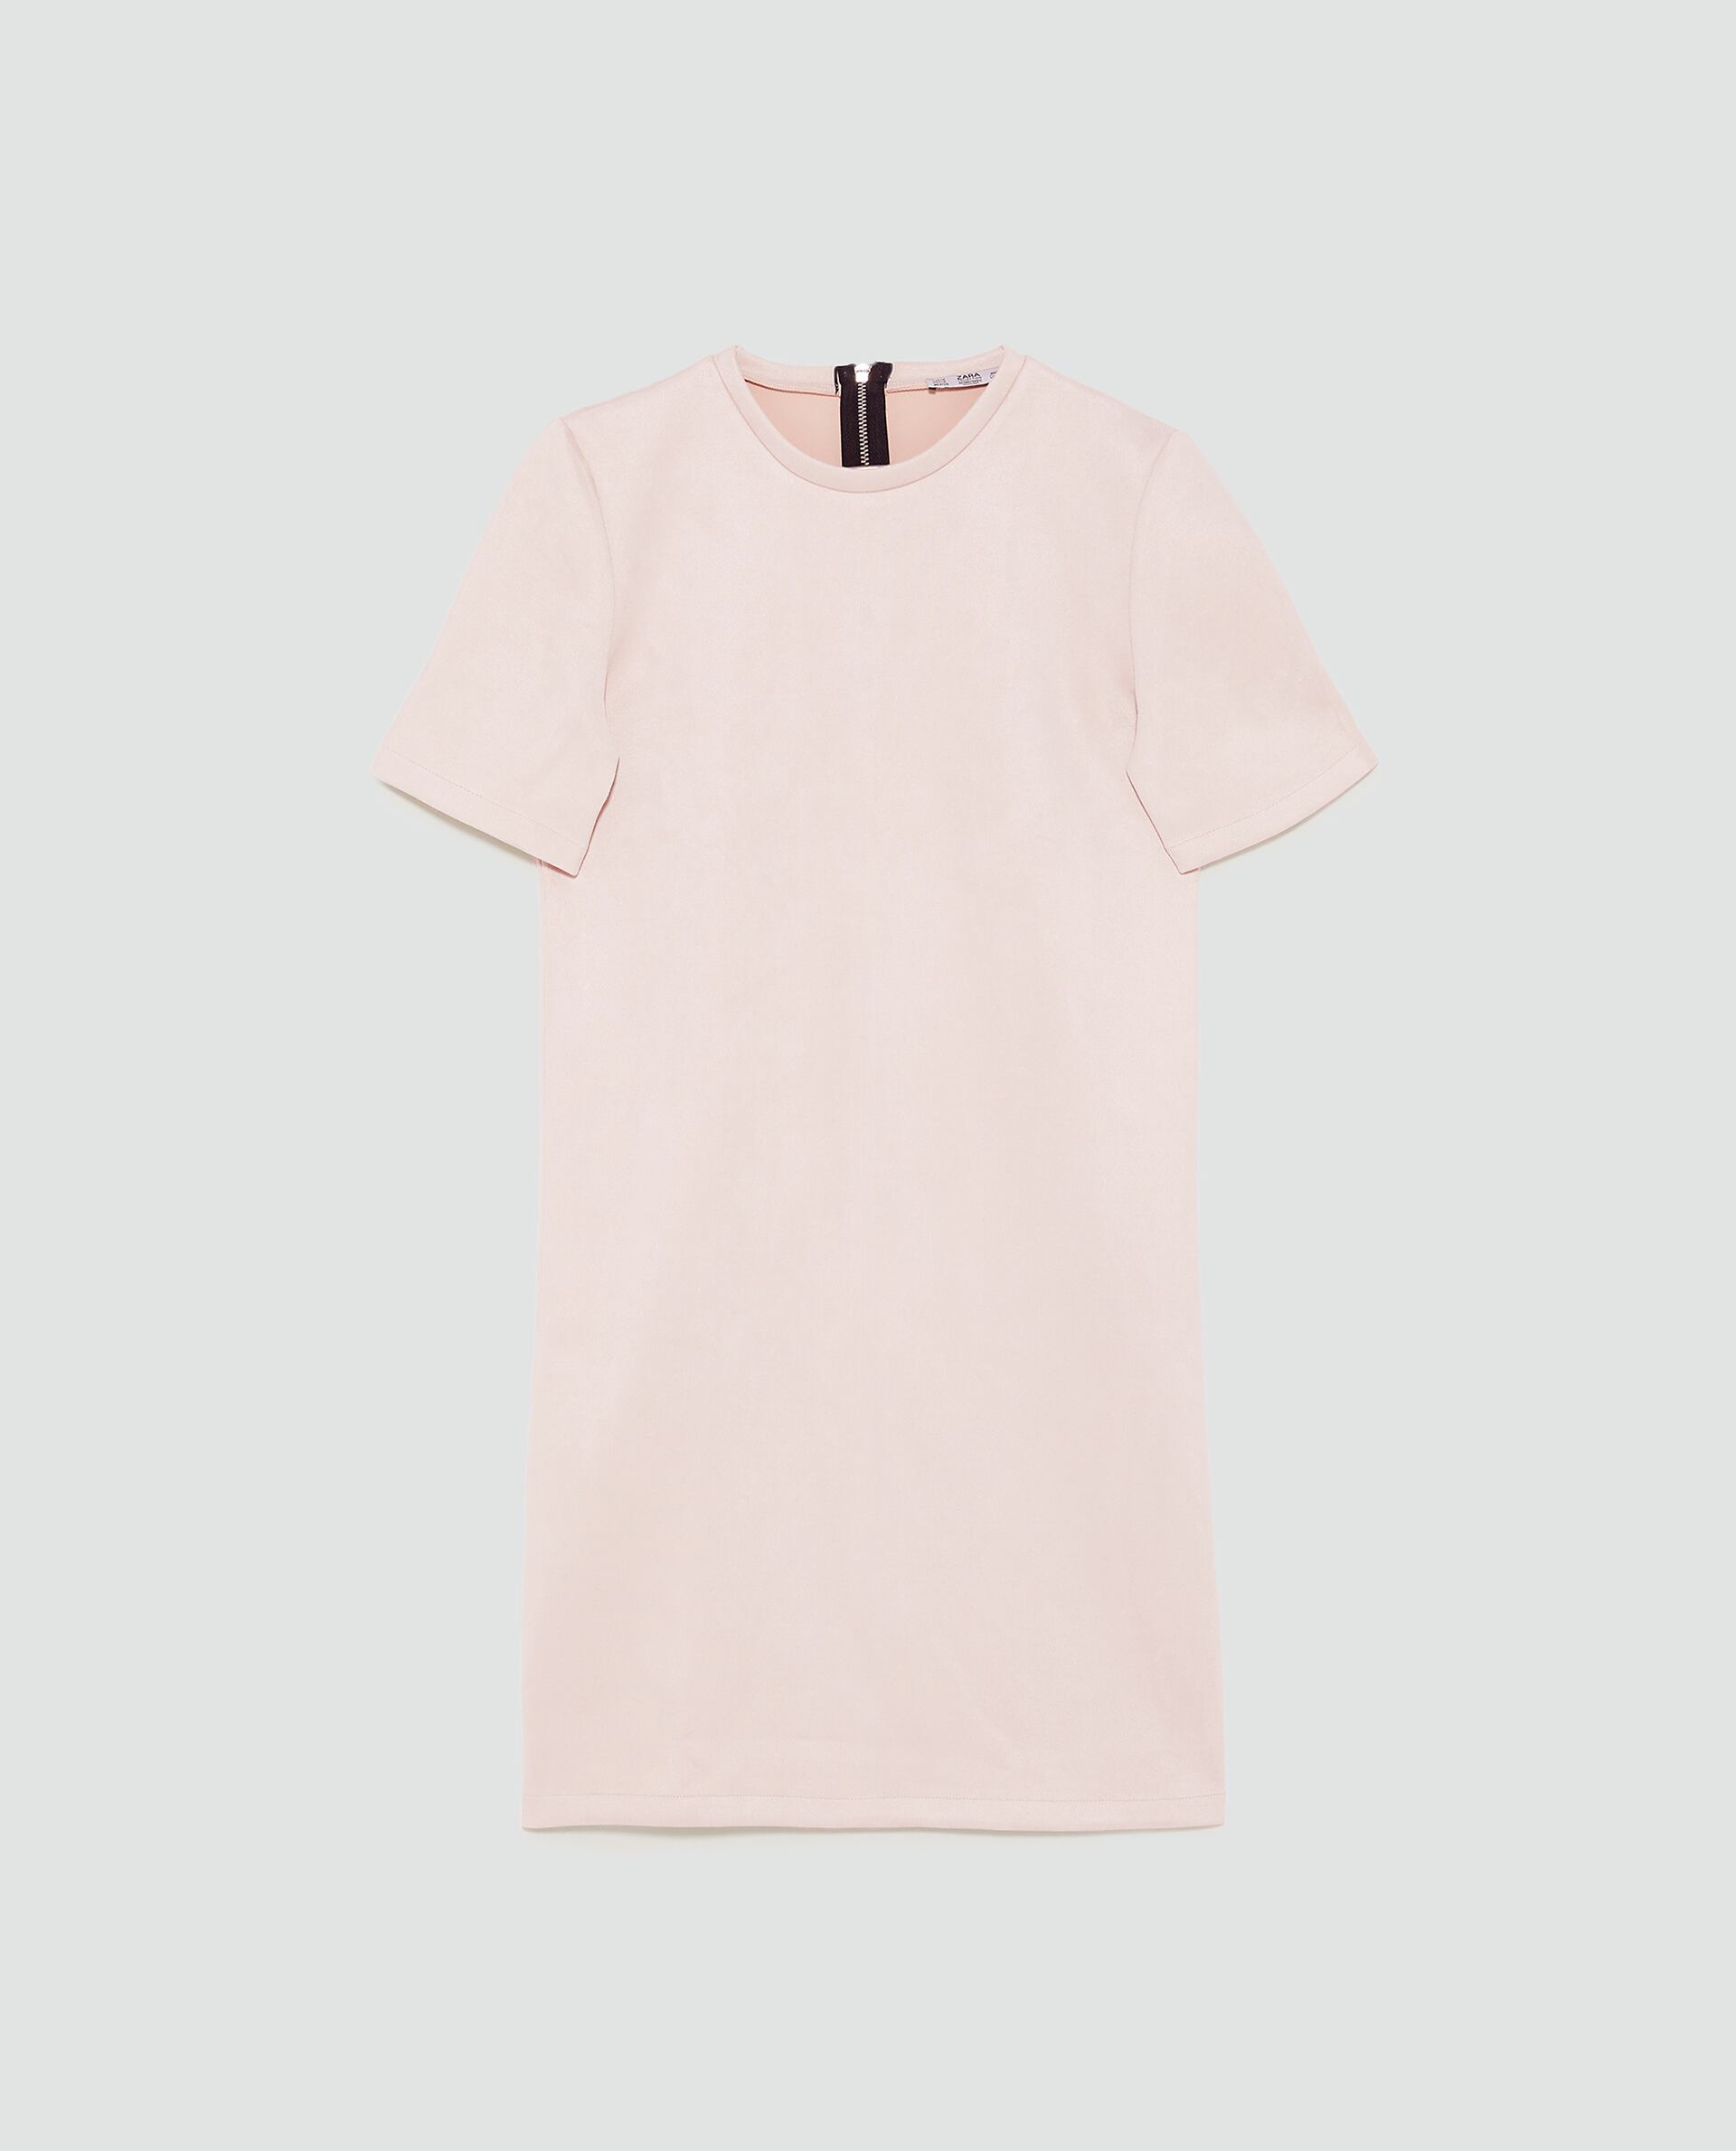 Zara SUEDE EFFECT DRESS at £25.99 | love the brands